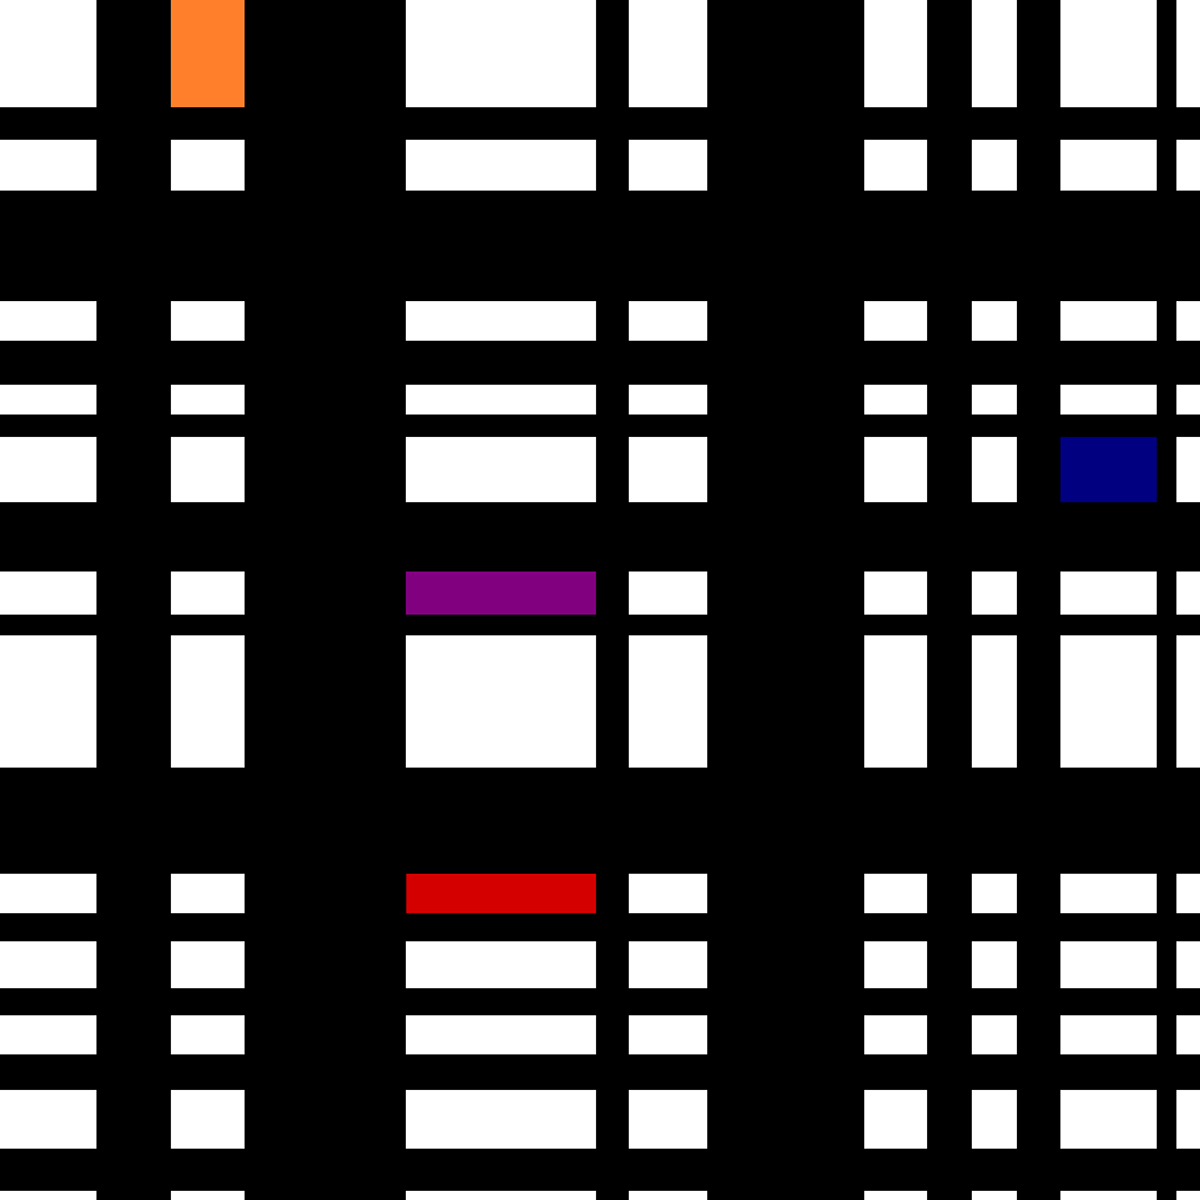 A matrix of lines with a little color